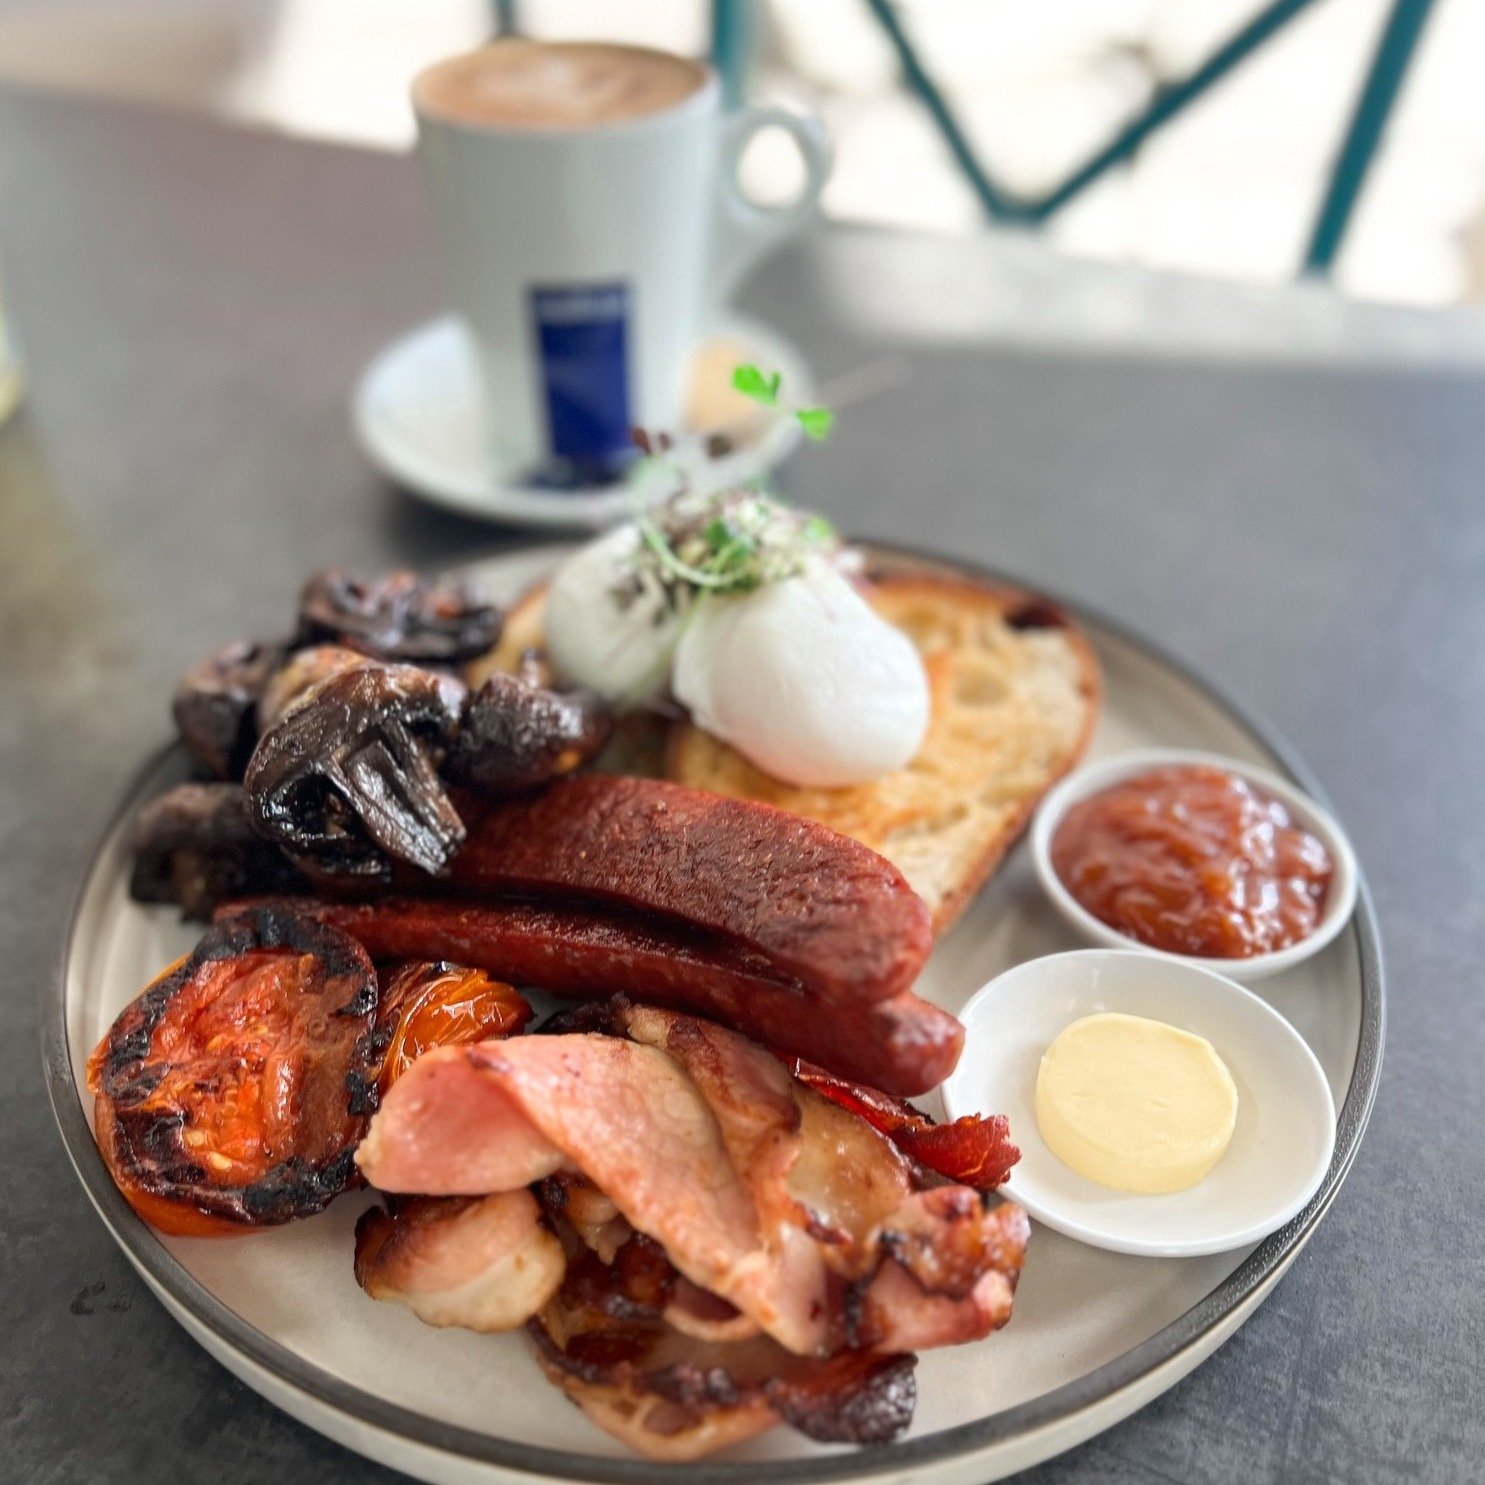 &lsquo;Build your own breakfast&rsquo; and have breakfast the way you like it! 

Visit our website to see our menu www.nicecafe.com.au available everyday from 7am except Tuesdays.

#nicecafe_nelsonbay #nicecafeatnelsonbay #aciabowl #portstephens #bre